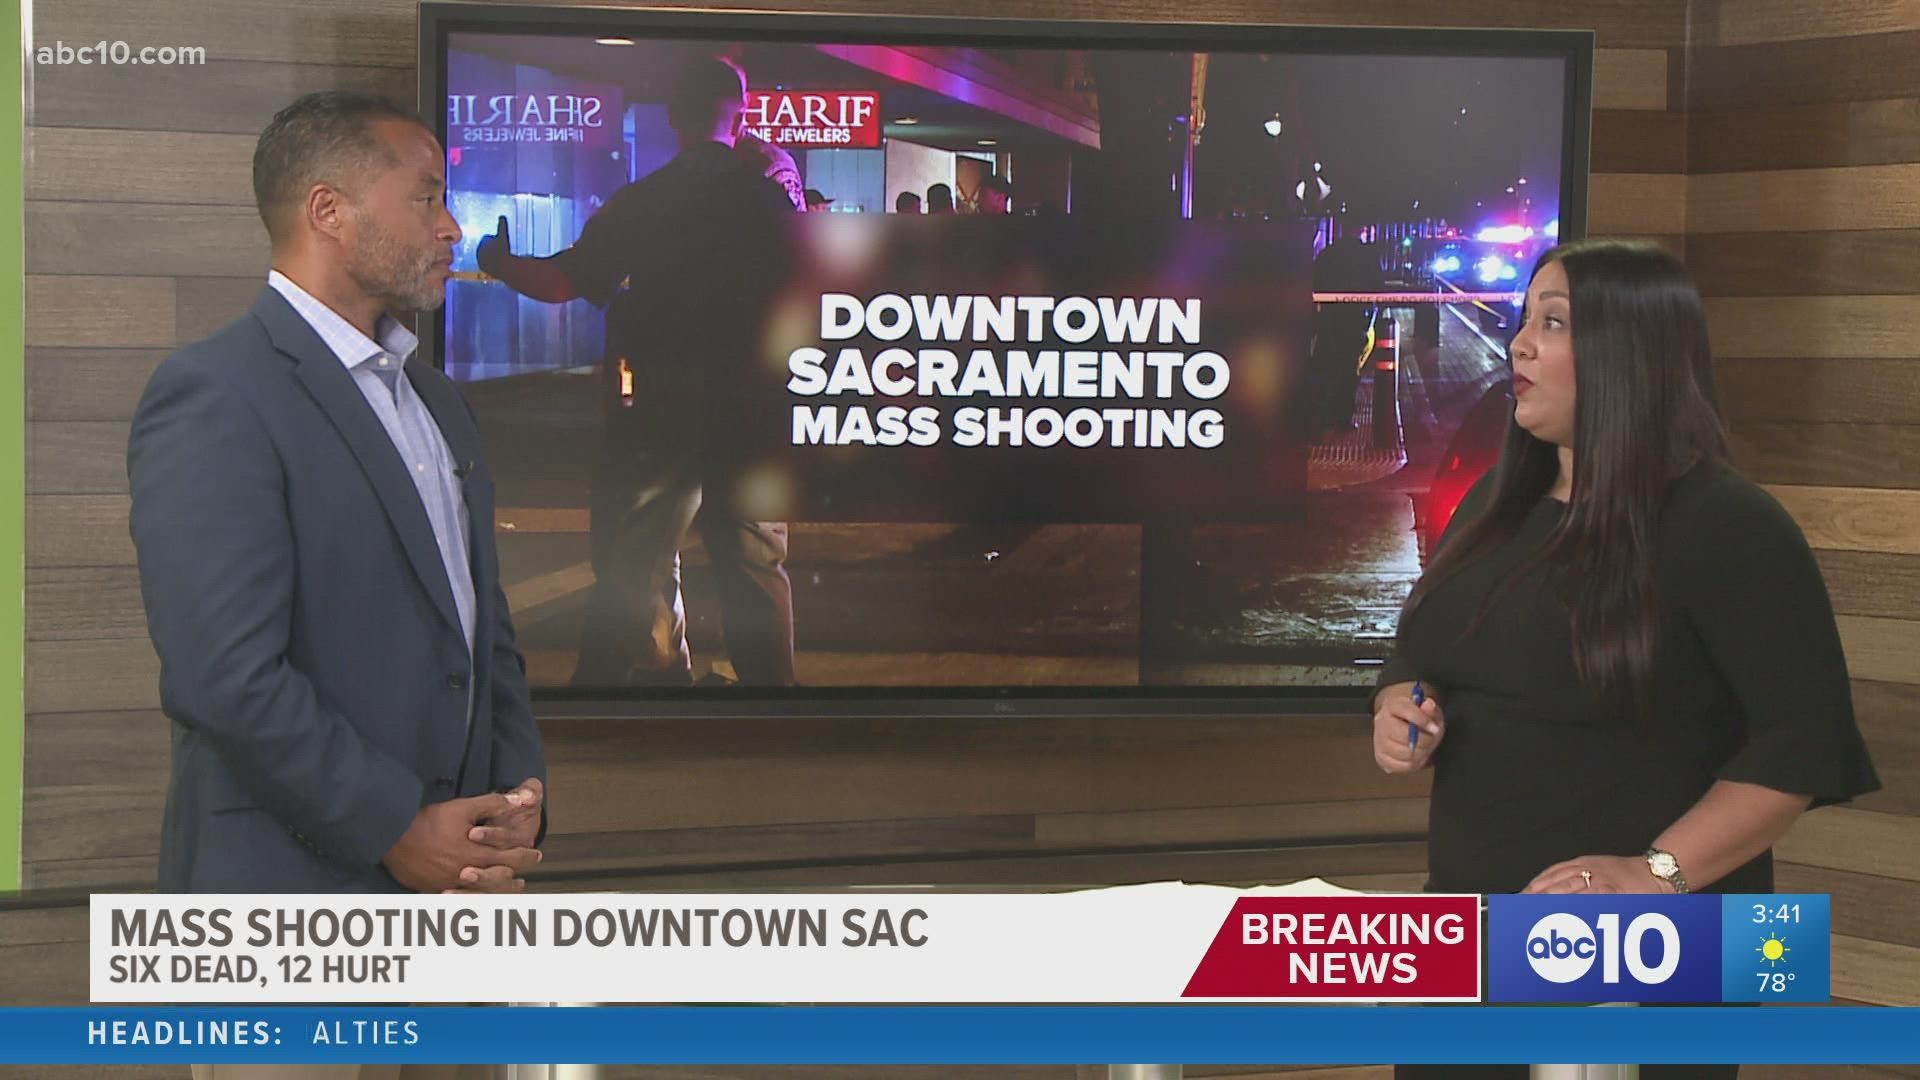 Police say six people are dead and 12 others have been injured after a shooting early Sunday morning in downtown Sacramento.